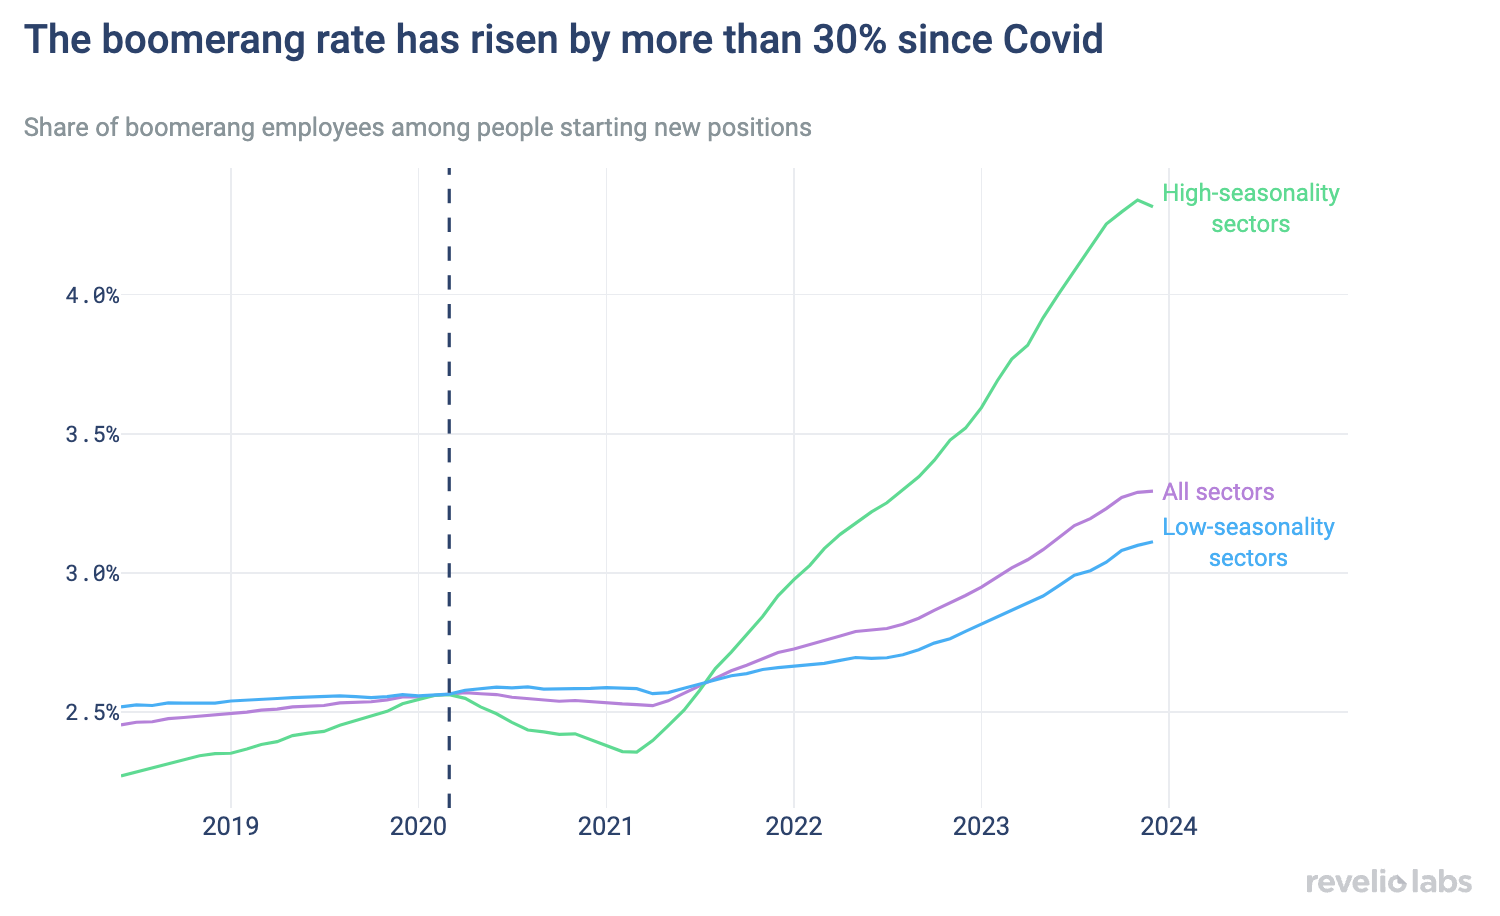 The boomerang rate has risen by more than 30% since Covid